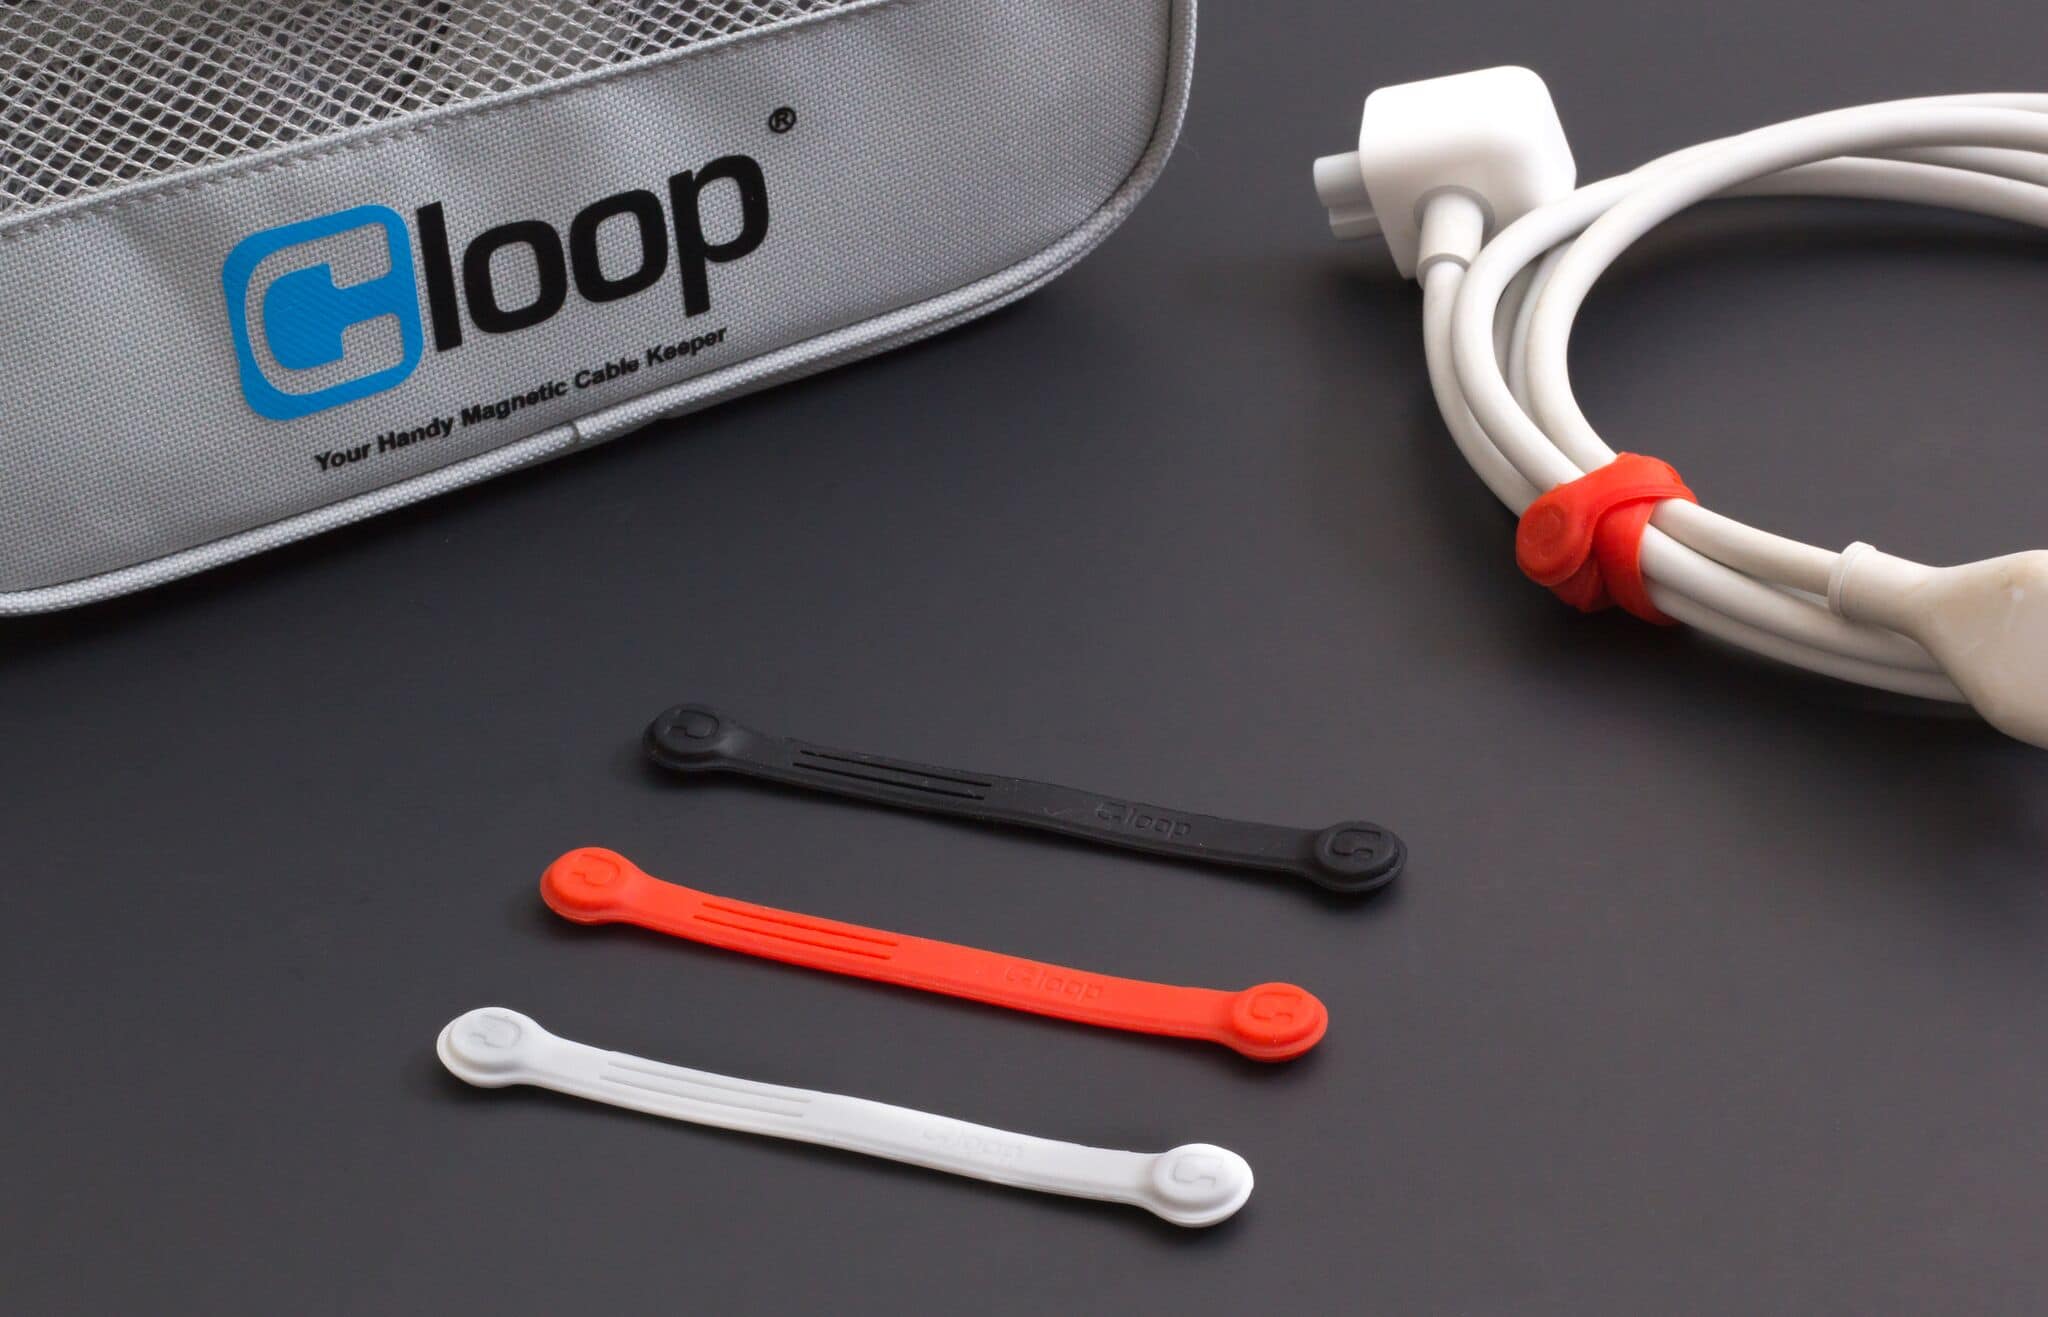 Last Day for Cloop XL Magnetic Cable Keeper 2.0 on Kickstarter